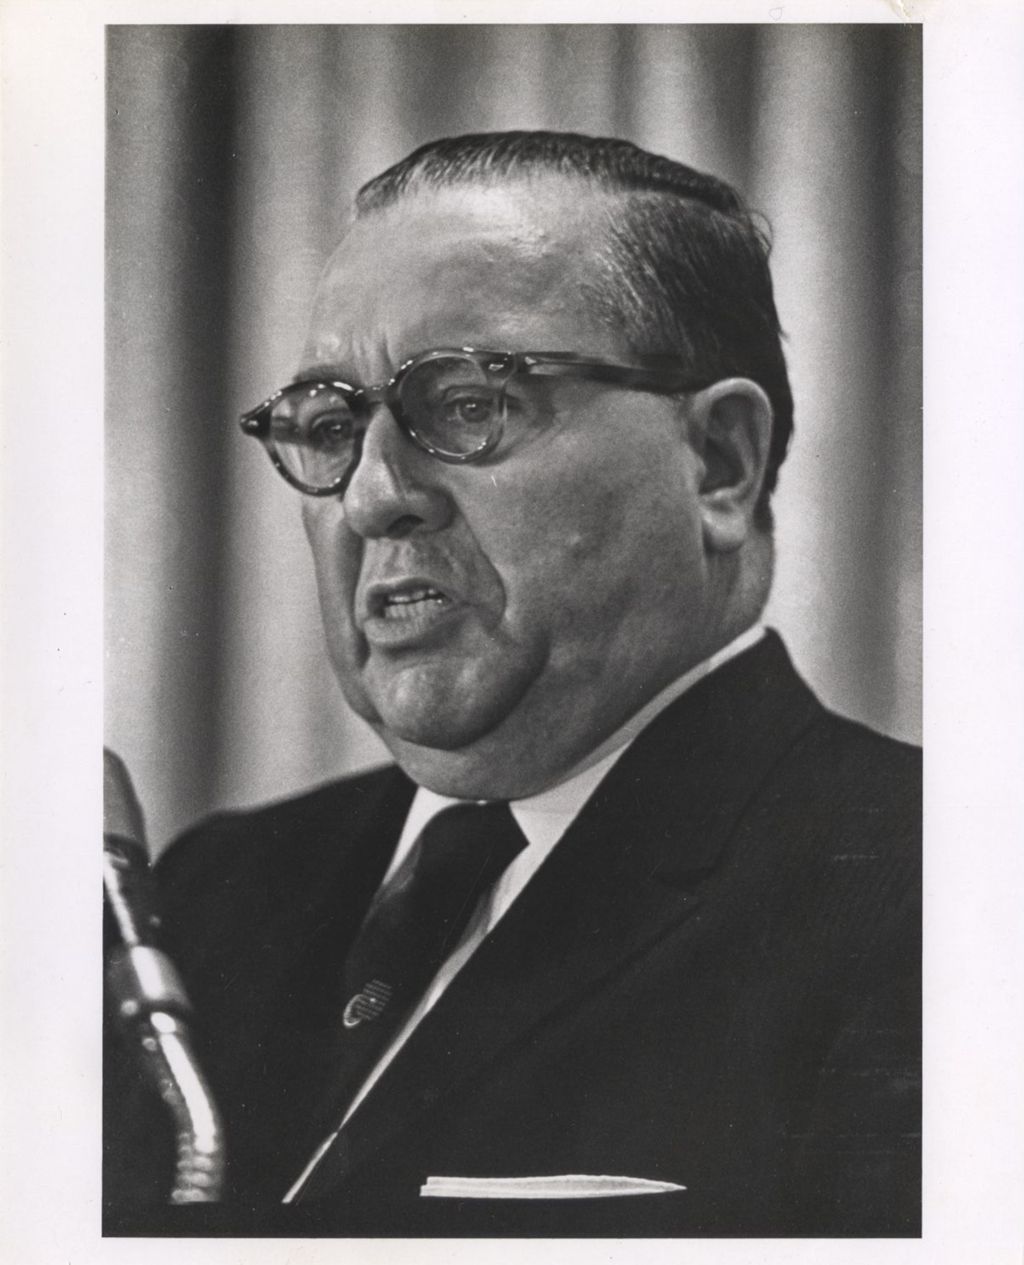 Portrait of Richard J. Daley at the White House Regional Conference